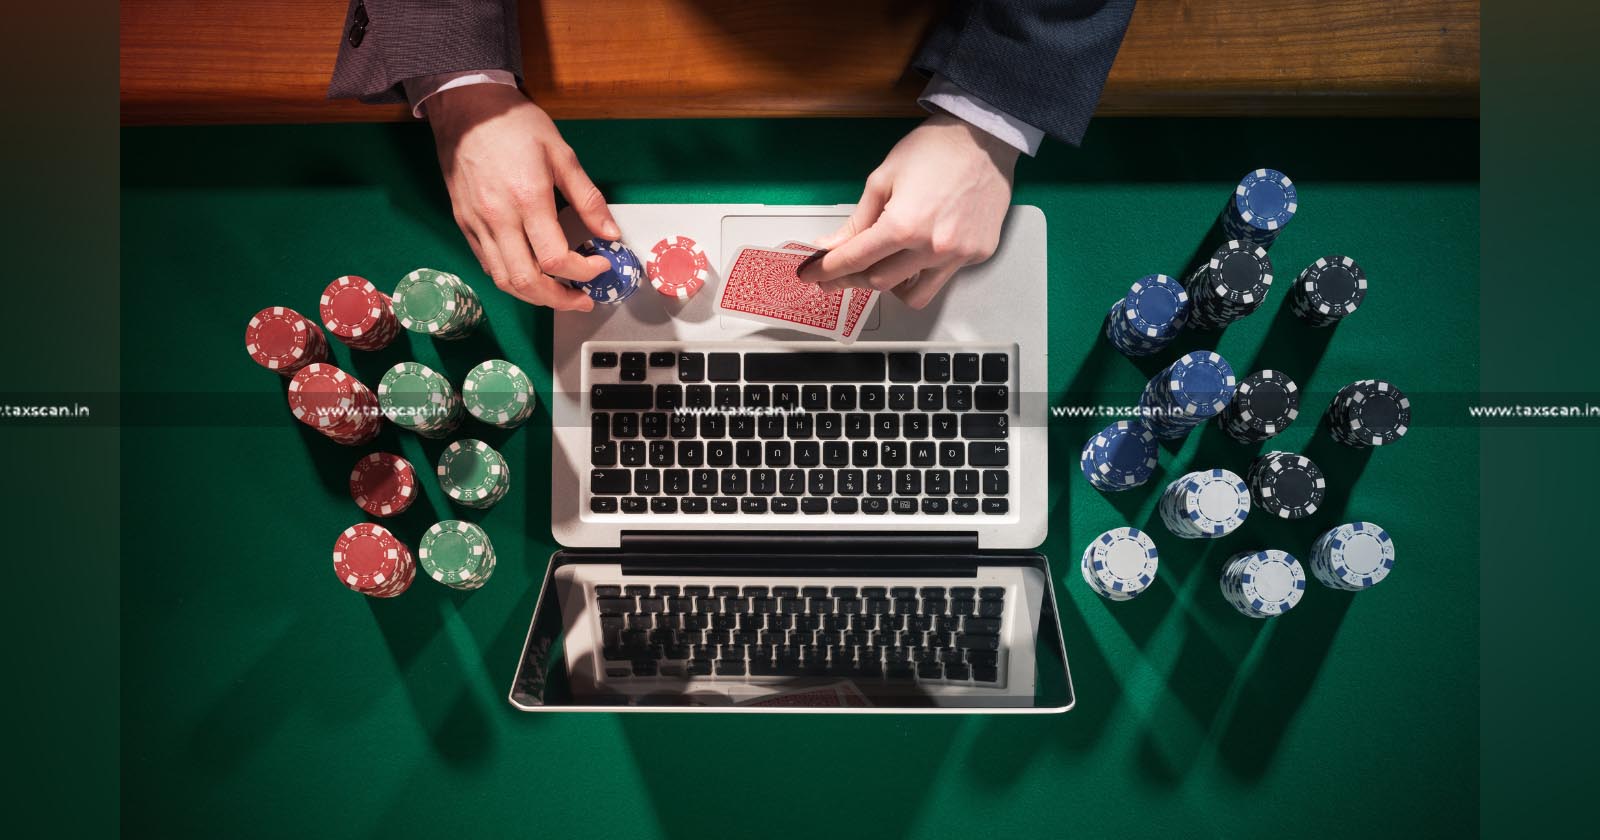 Did You Start best online casinos For Passion or Money?